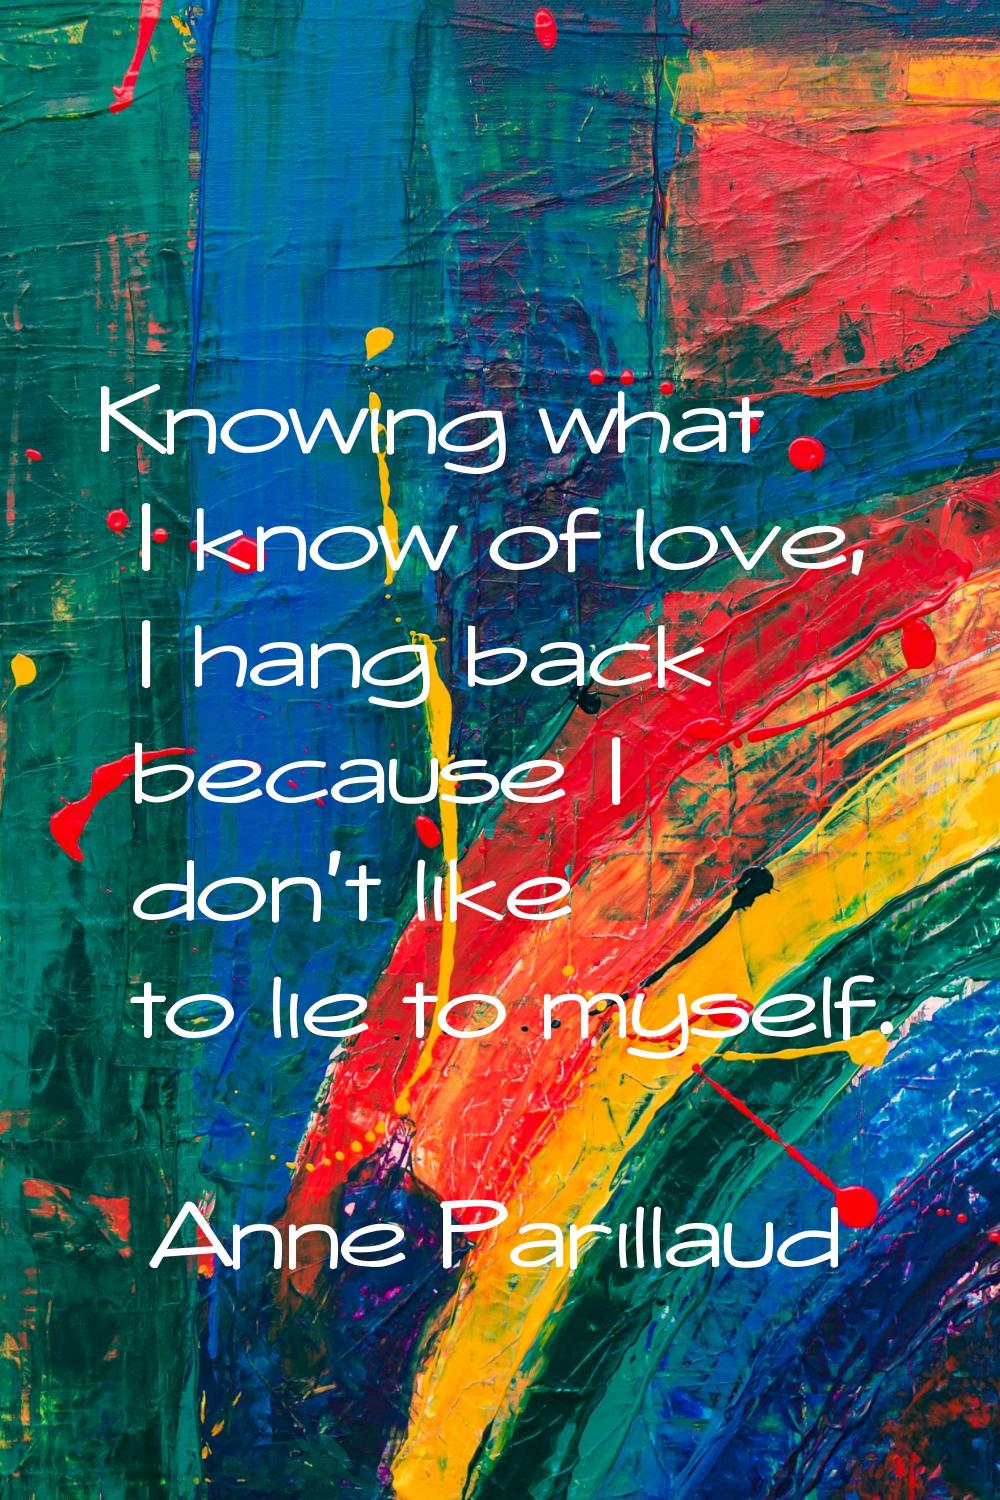 Knowing what I know of love, I hang back because I don't like to lie to myself.